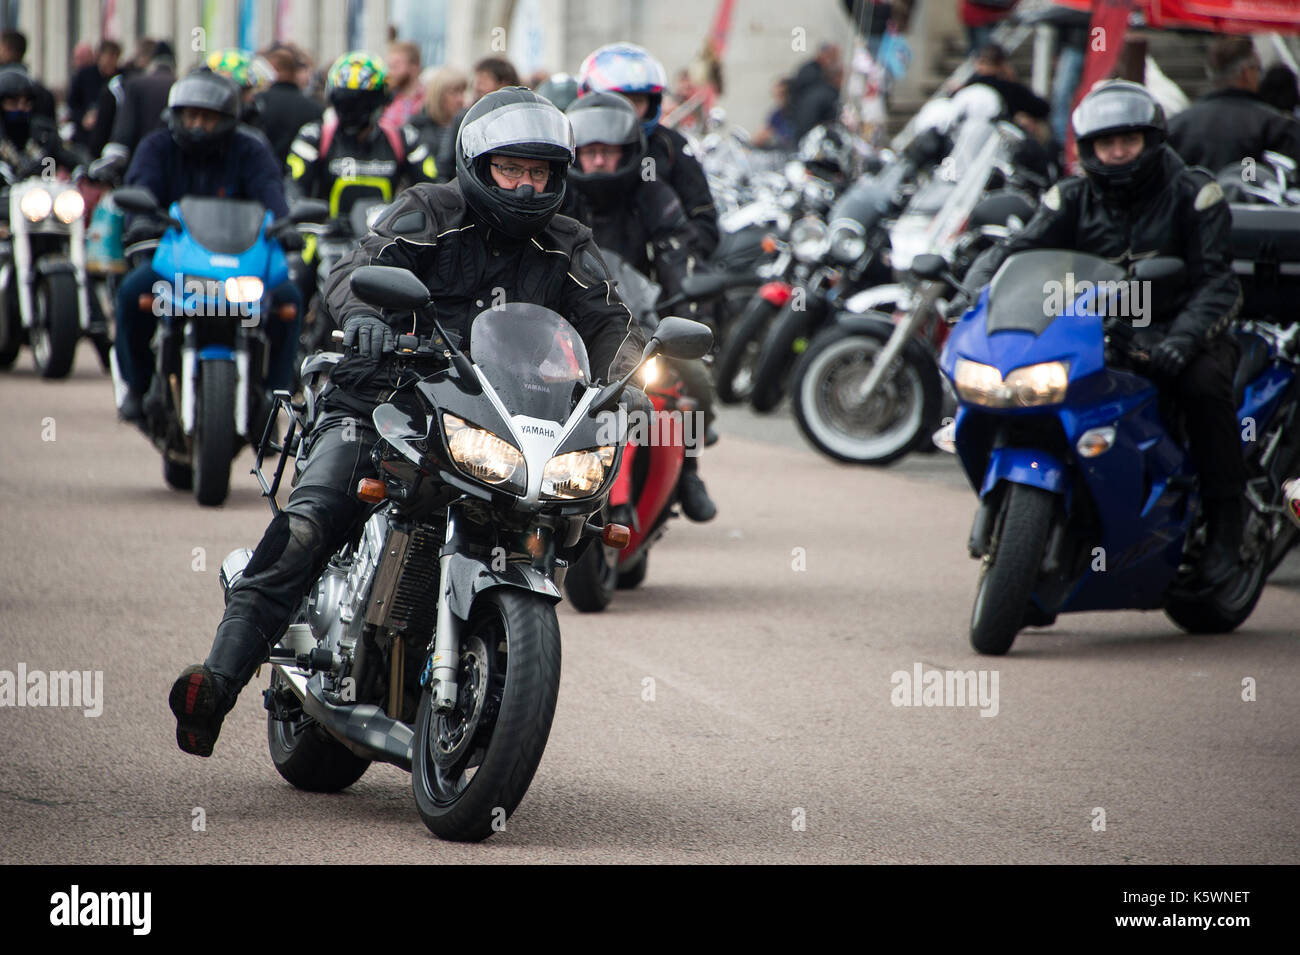 Ace Cafe Reunion 2017 Brighton Burn-Up, Thousands of bikers Descended on the city of Brighton, converging on Madeira Drive for the annual motorcycle r Stock Photo